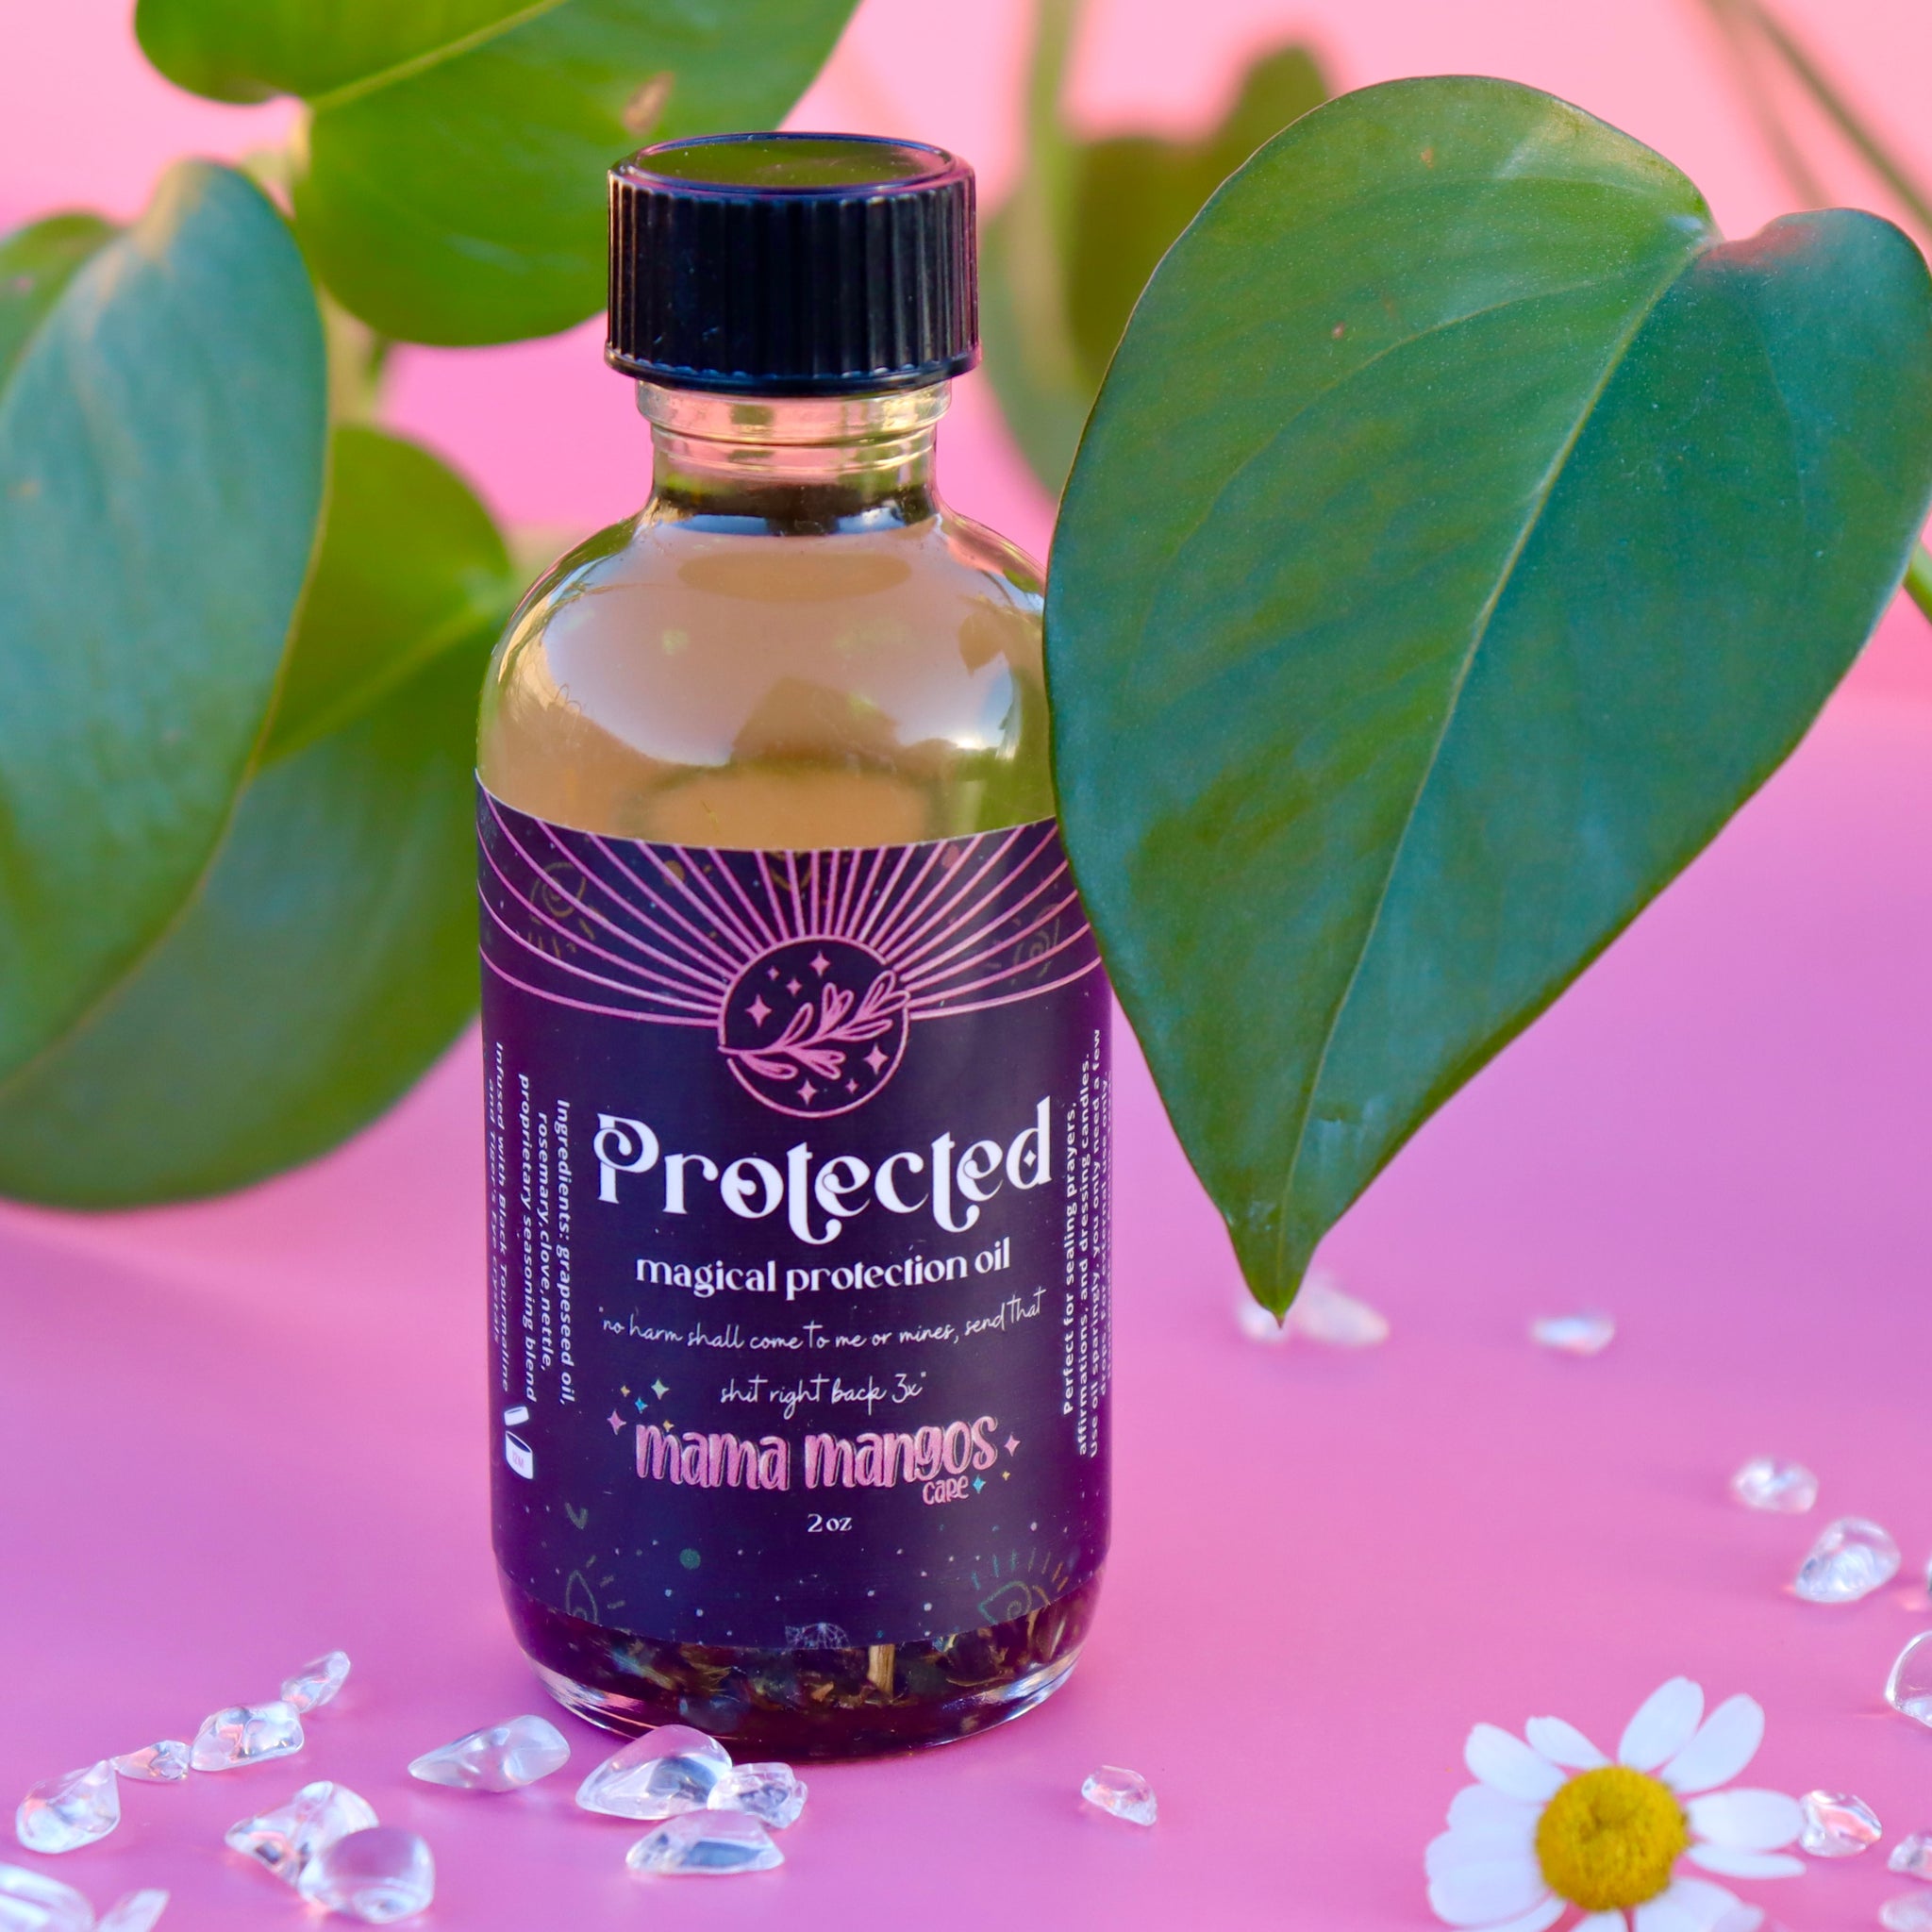 PROTECTED - magical protection oil